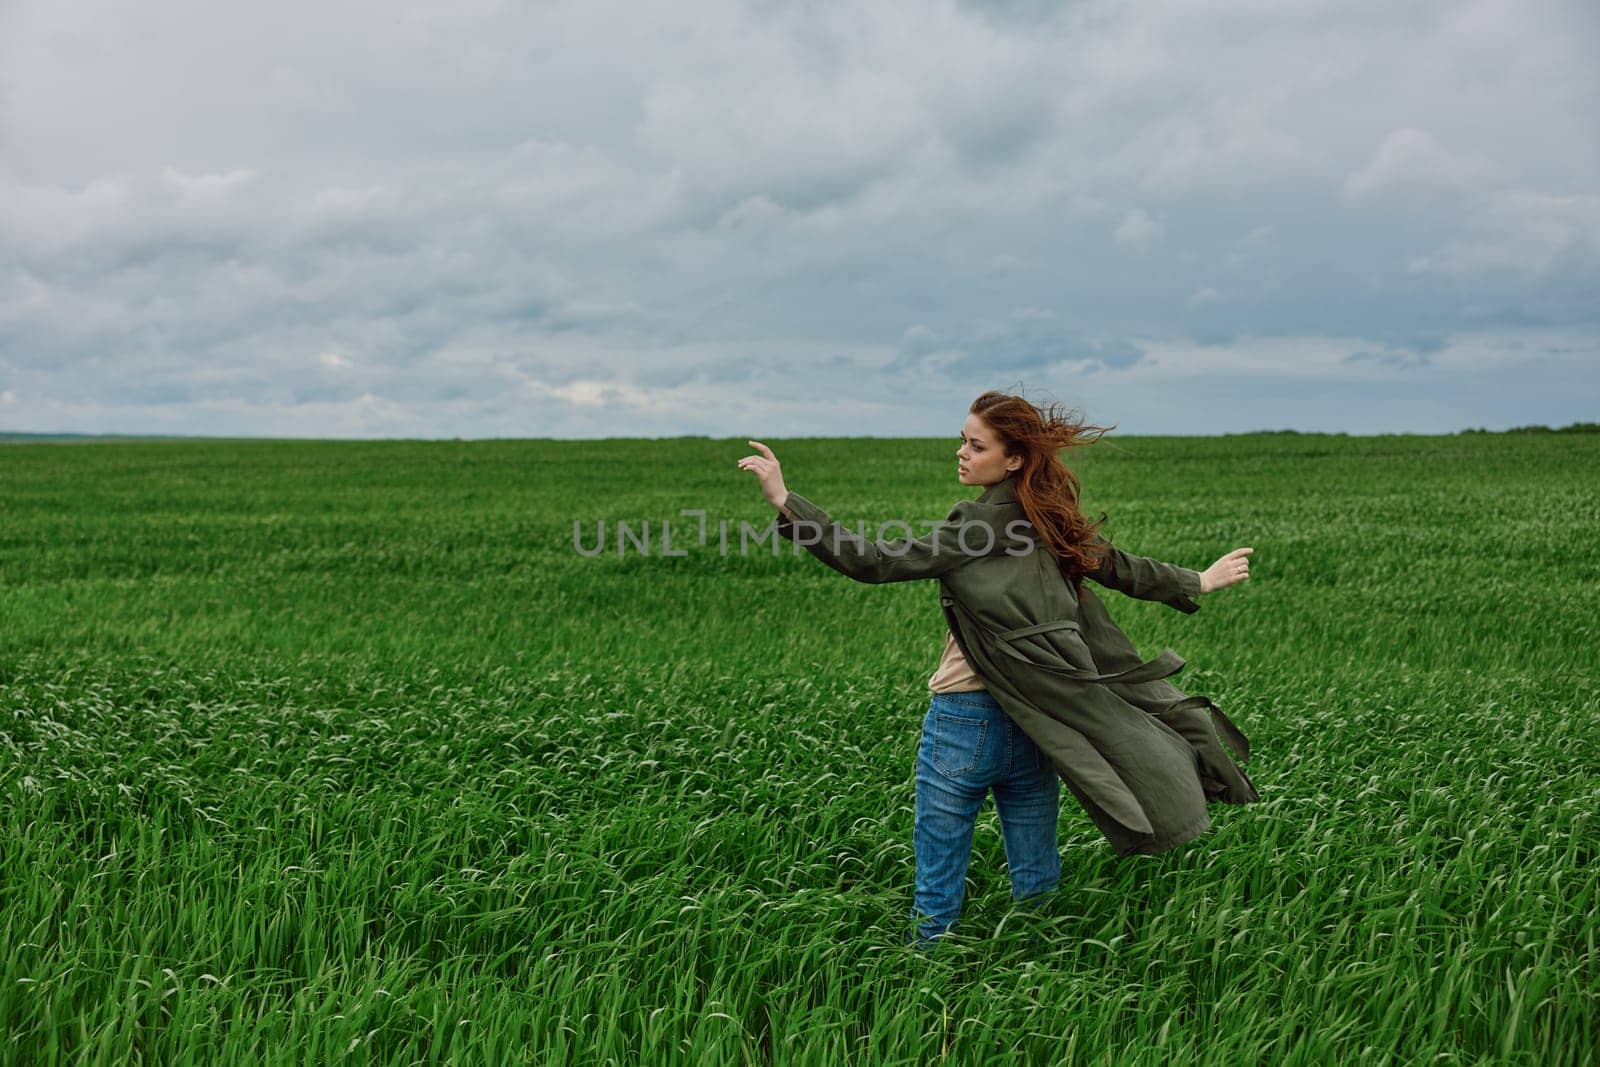 a woman in a long coat stands in tall green grass in a field, in cloudy weather, enjoying nature and the view by Vichizh